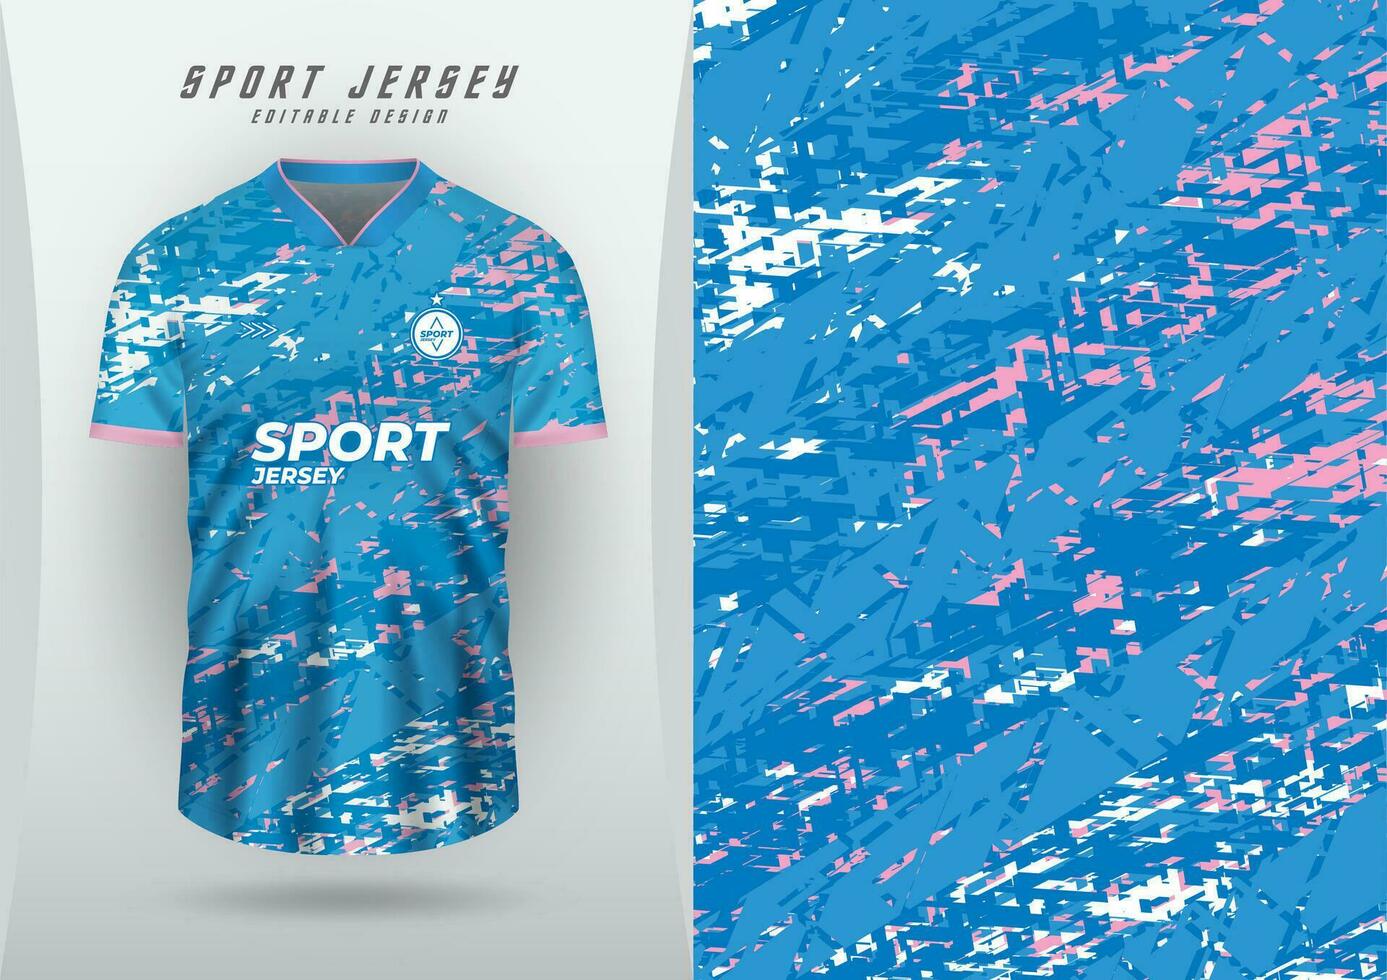 Background for sports jersey, soccer jersey, running jersey, racing jersey, grunge pattern, blue, pink and white. vector